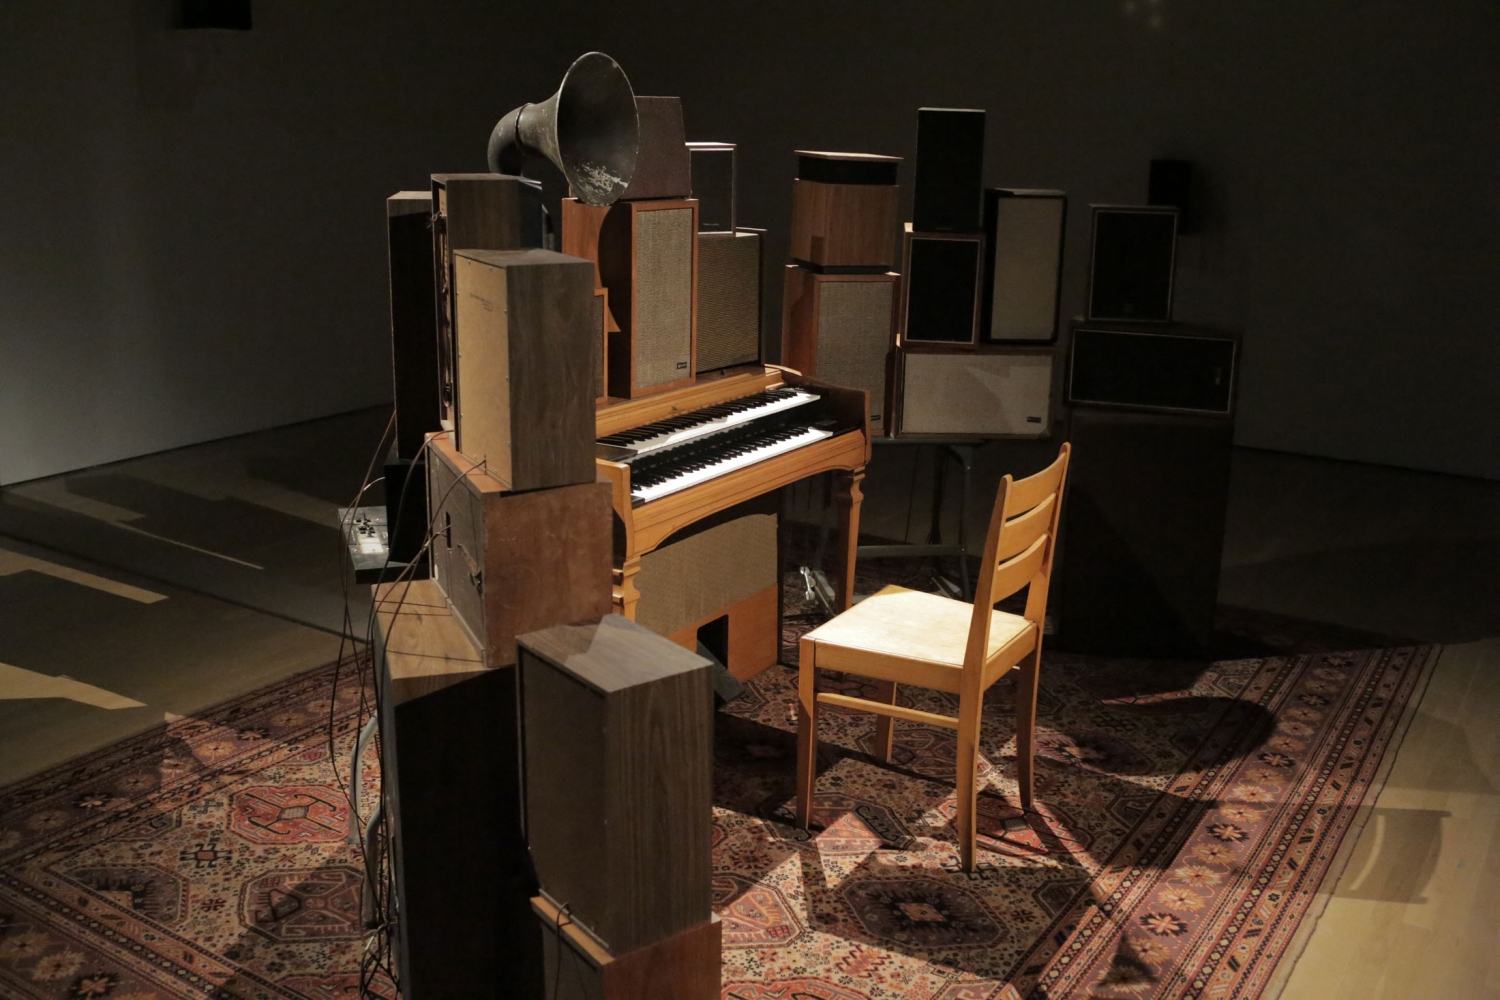 Janet Cardiff and George Bures Miller
The Poetry Machine,&amp;nbsp;2017
Interactive audio/mixed-media installation including organ, speakers, carpet, computer and electronics
Dimensions variable
Installation view,&amp;nbsp;Leonard Cohen: A Crack in Everything
November 9, 2017 &amp;ndash;&amp;nbsp;April 12,&amp;nbsp;2018
Mus&amp;eacute;e d&amp;#39;art contemporain de Montr&amp;eacute;al, Canada